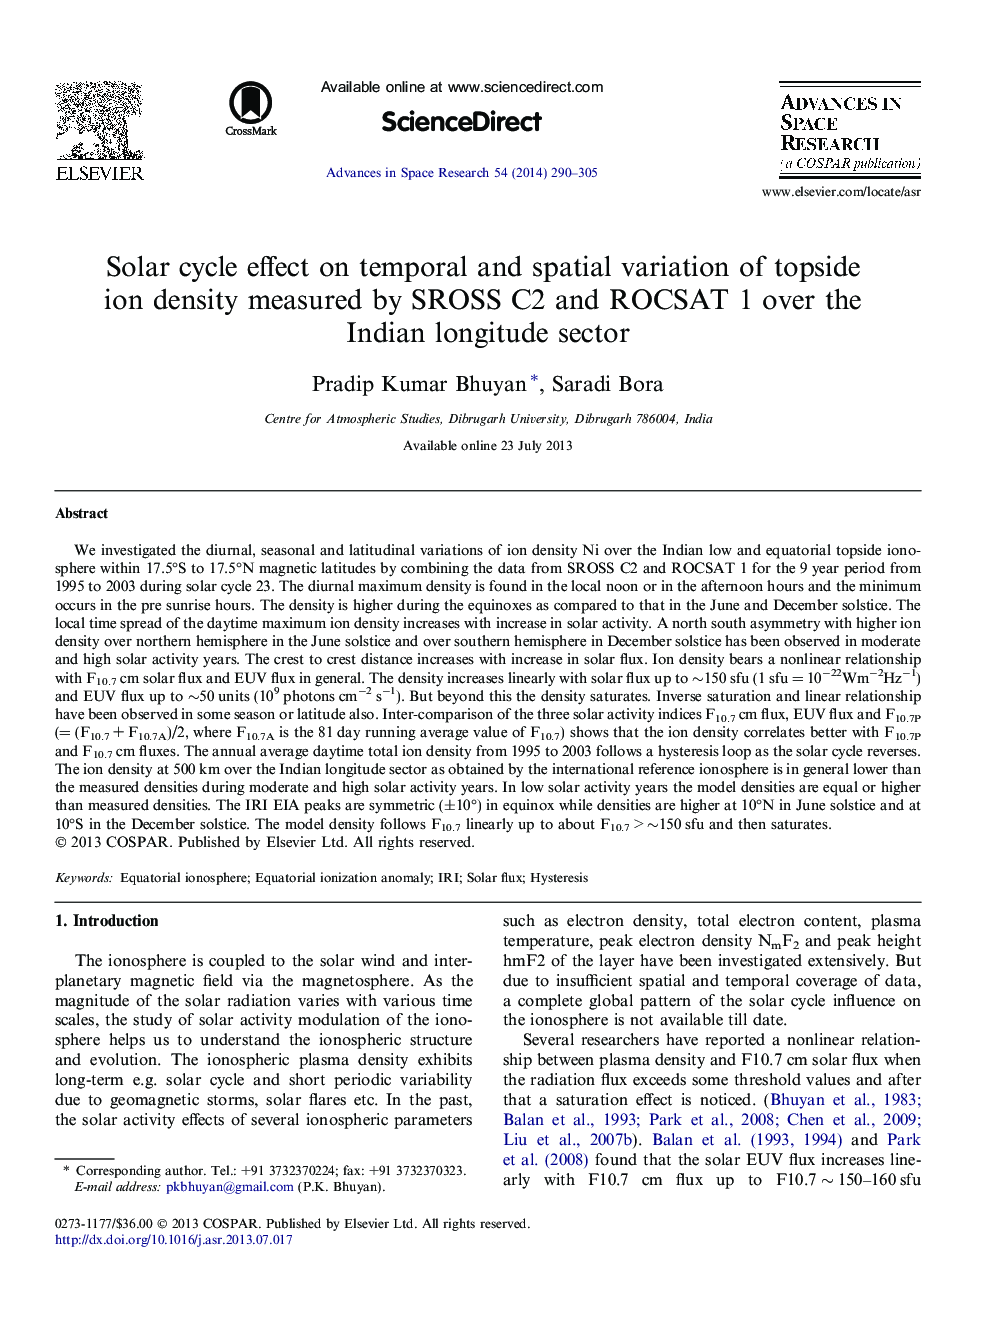 Solar cycle effect on temporal and spatial variation of topside ion density measured by SROSS C2 and ROCSAT 1 over the Indian longitude sector